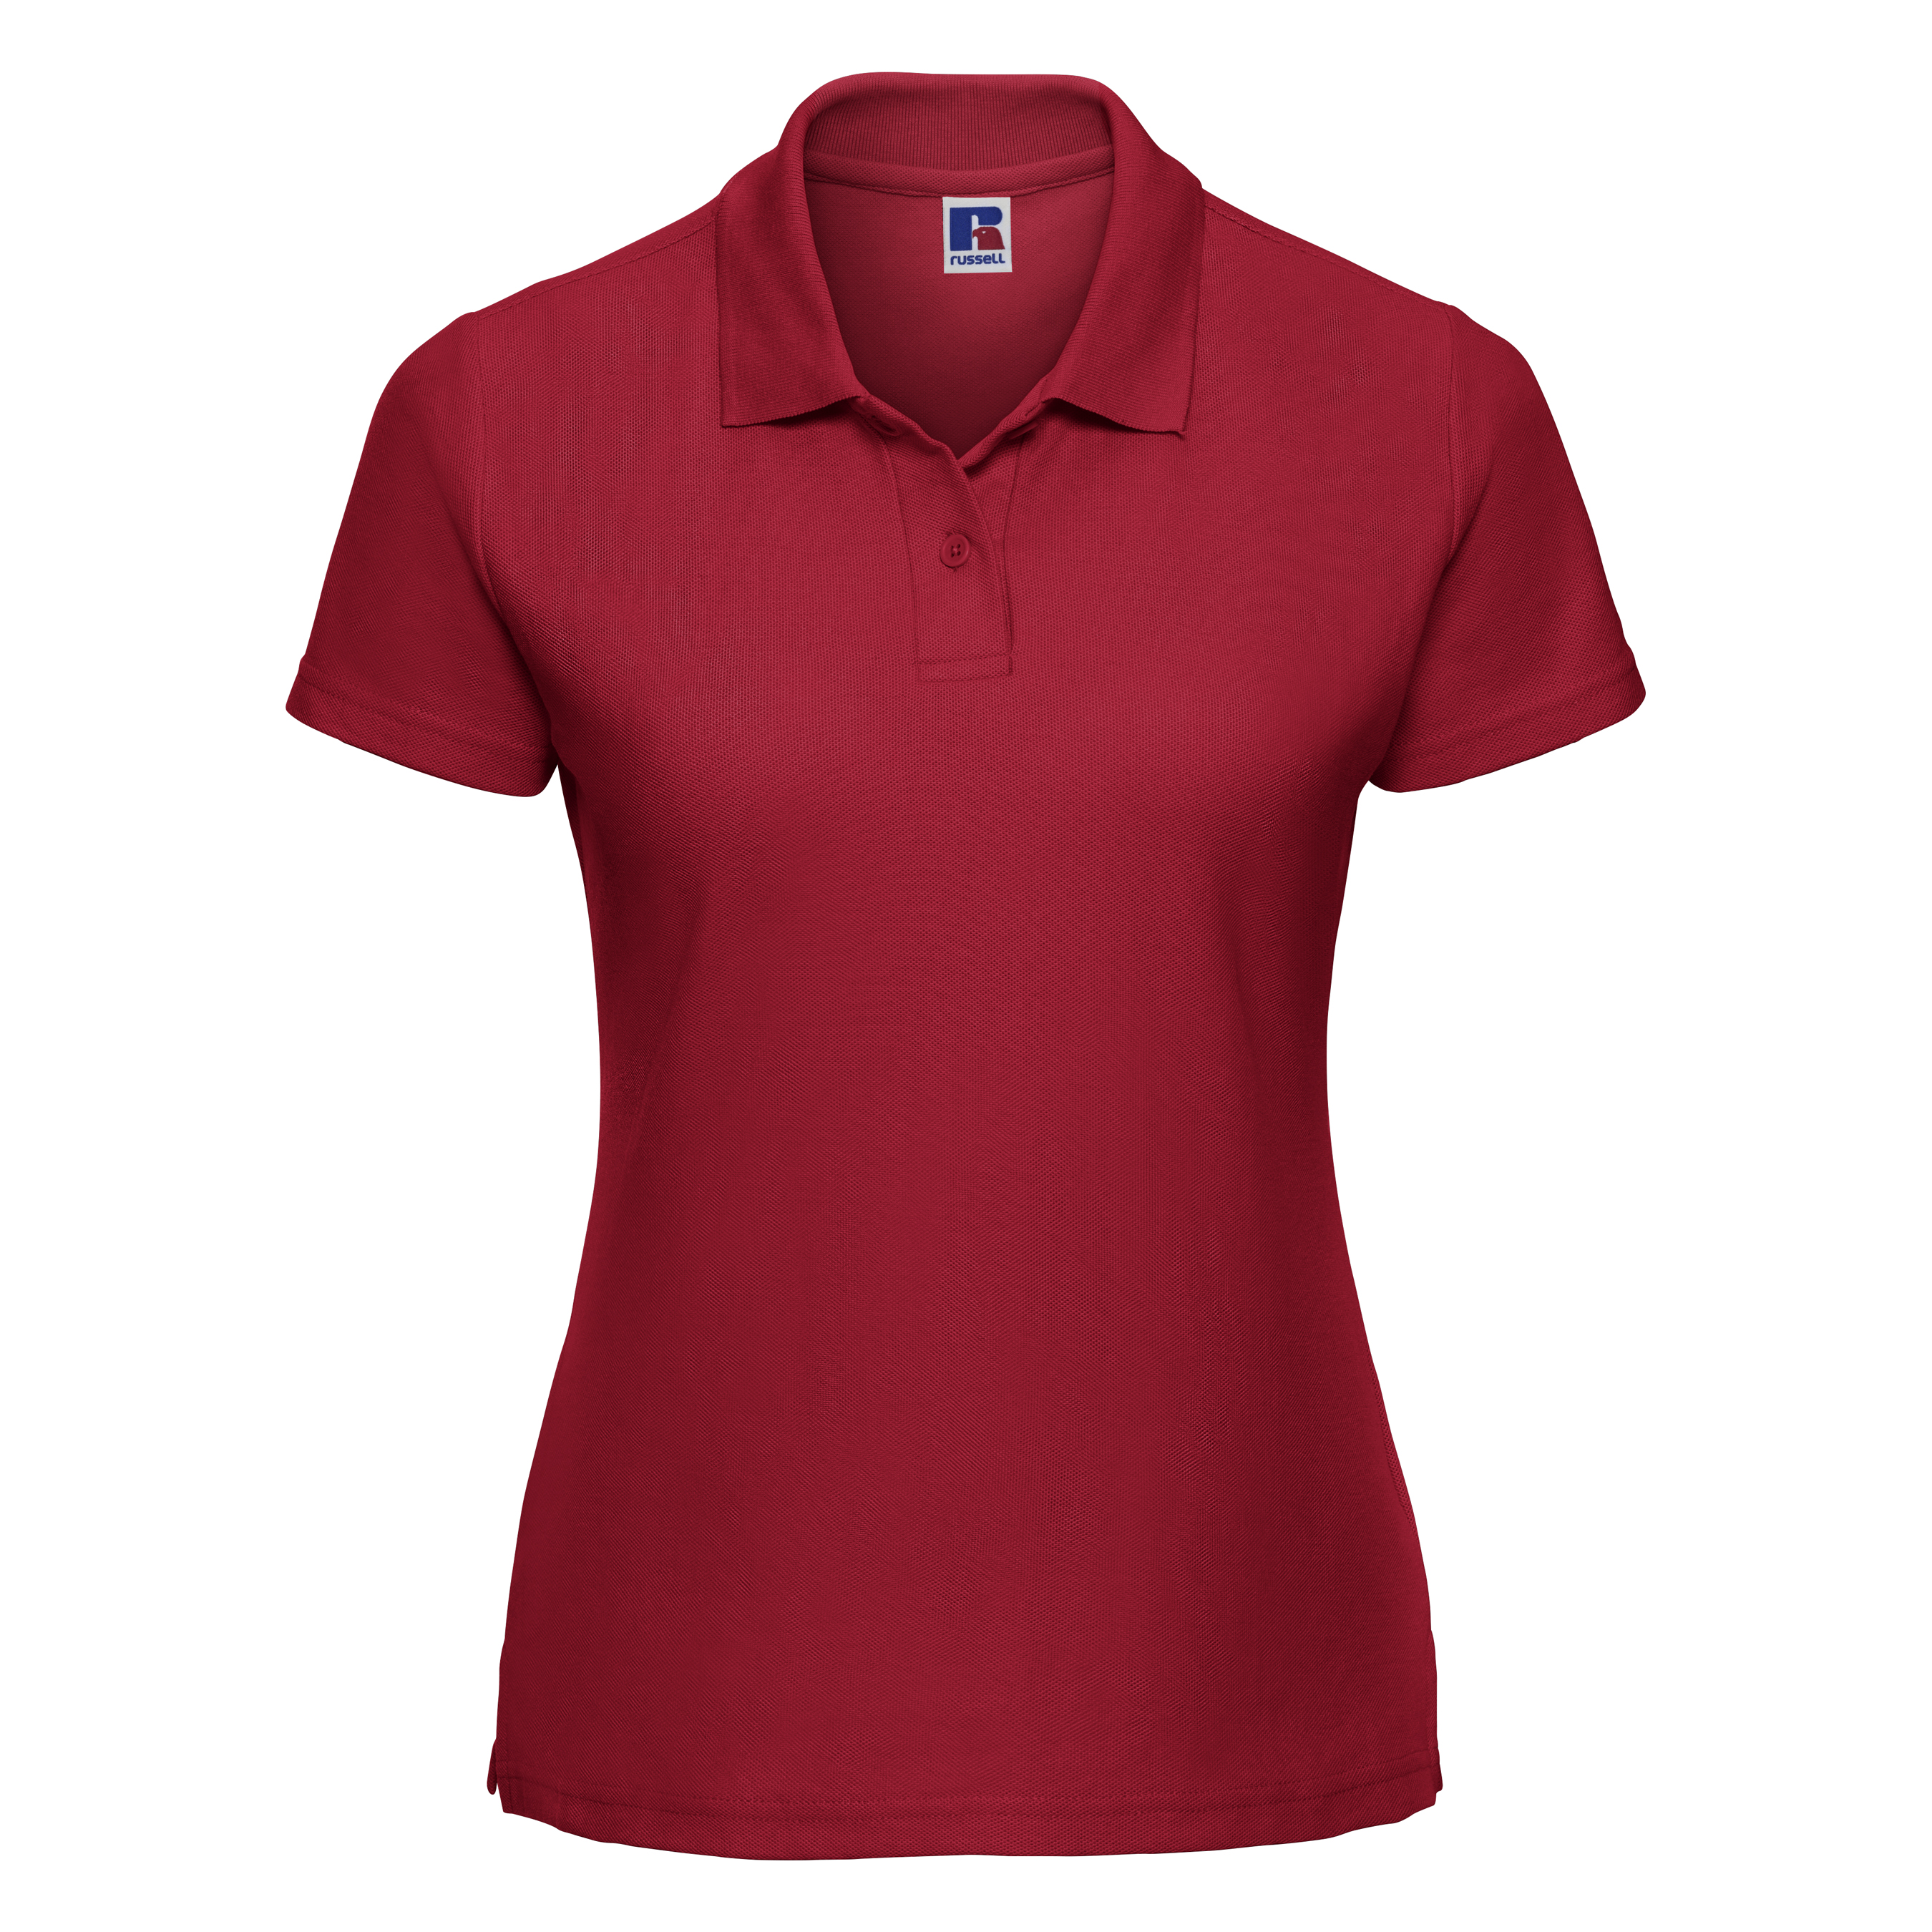 ax-httpswebsystems.s3.amazonaws.comtmp_for_downloadrussell-womens-polycotton-classic-red.jpg